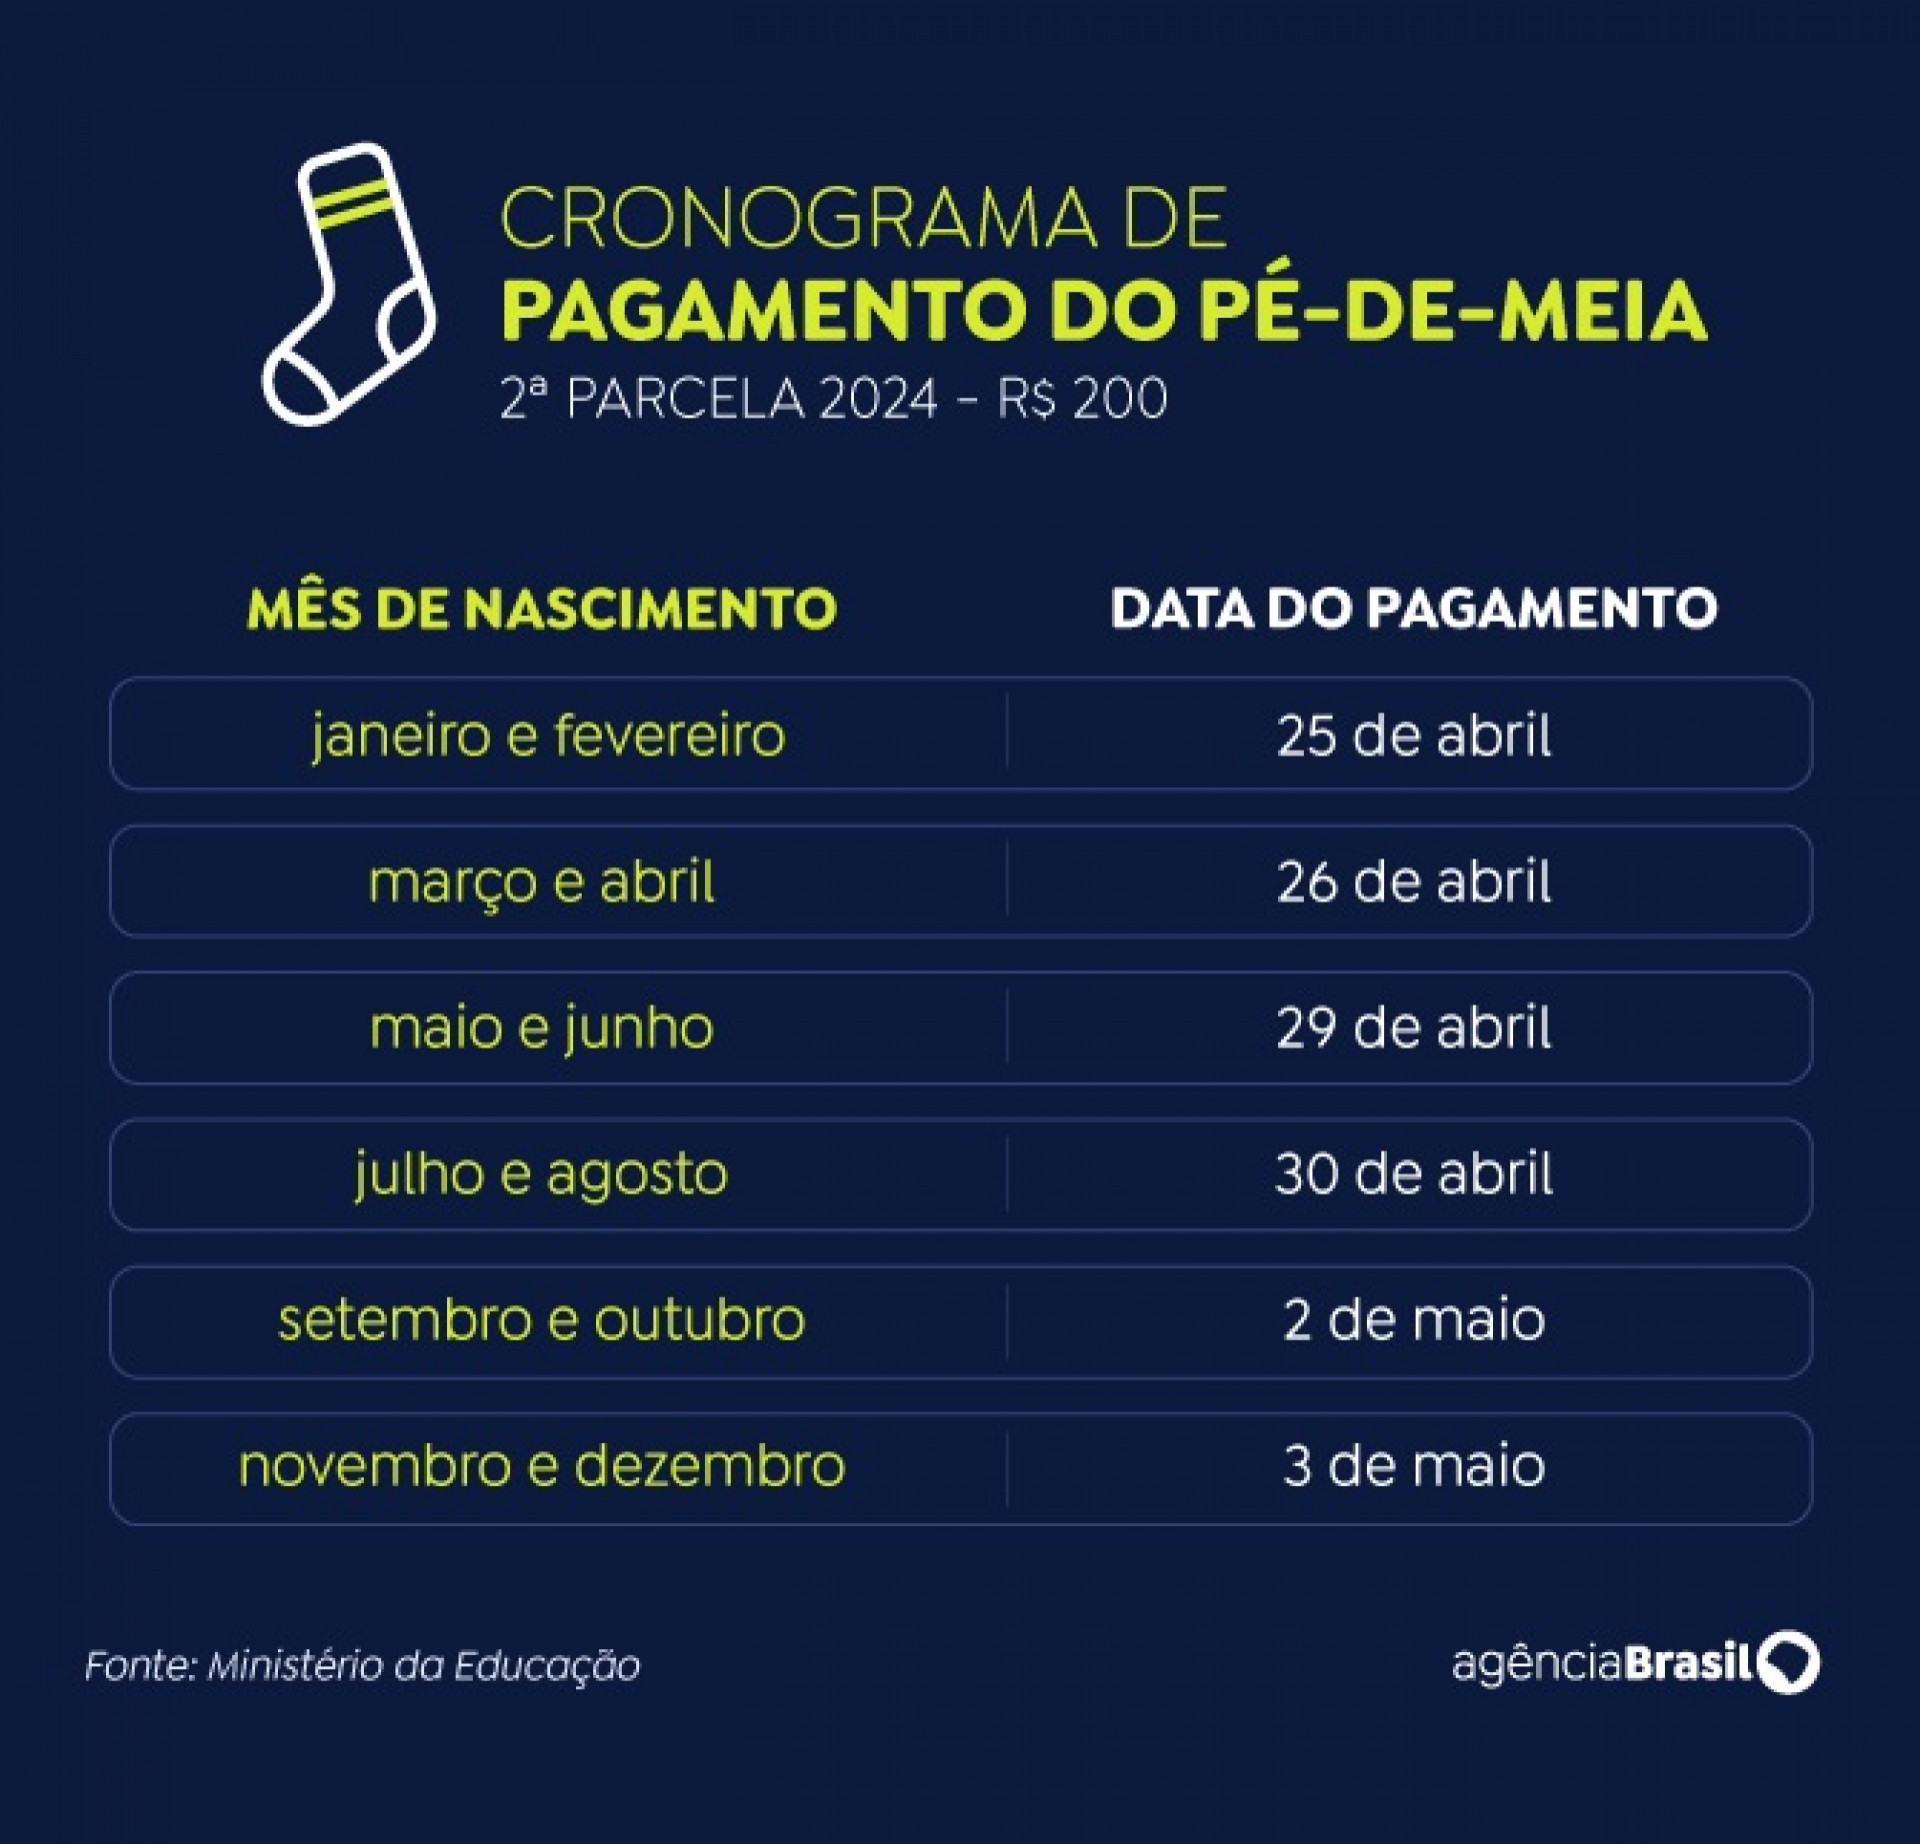 Data was published by the Ministry of Education - Arte/Agência Brasil